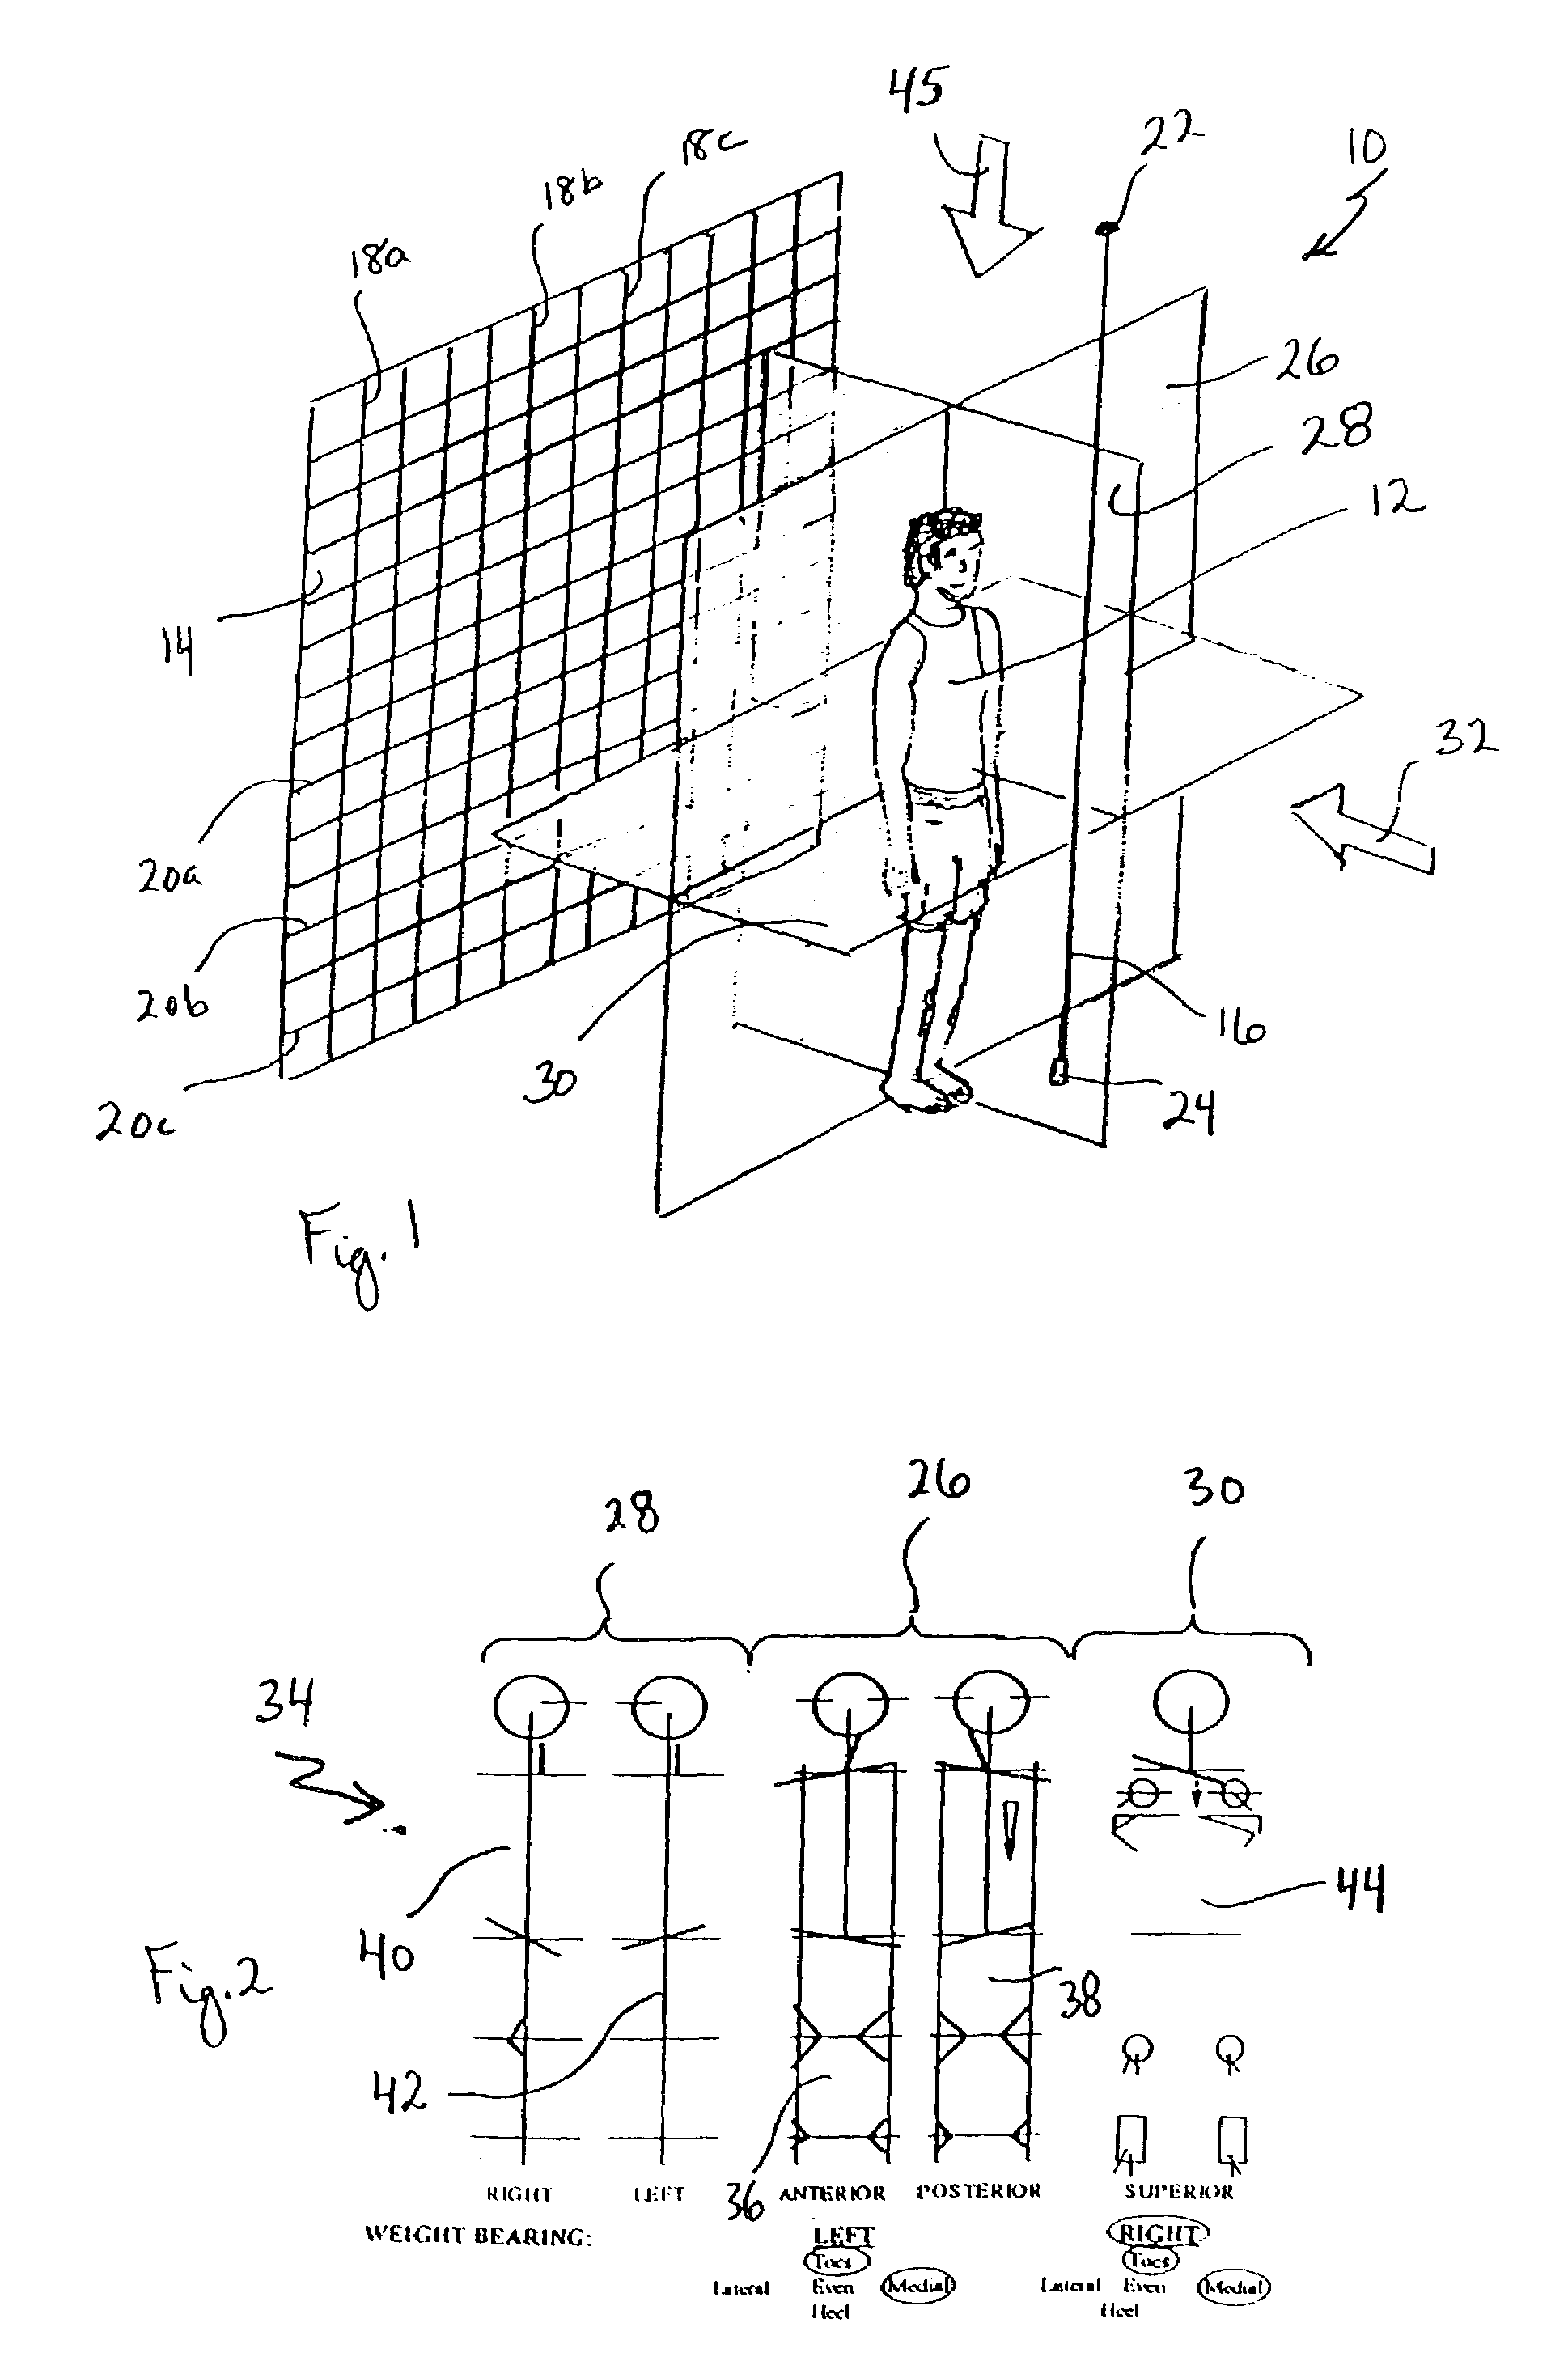 System and method for implementing postural realignment programs